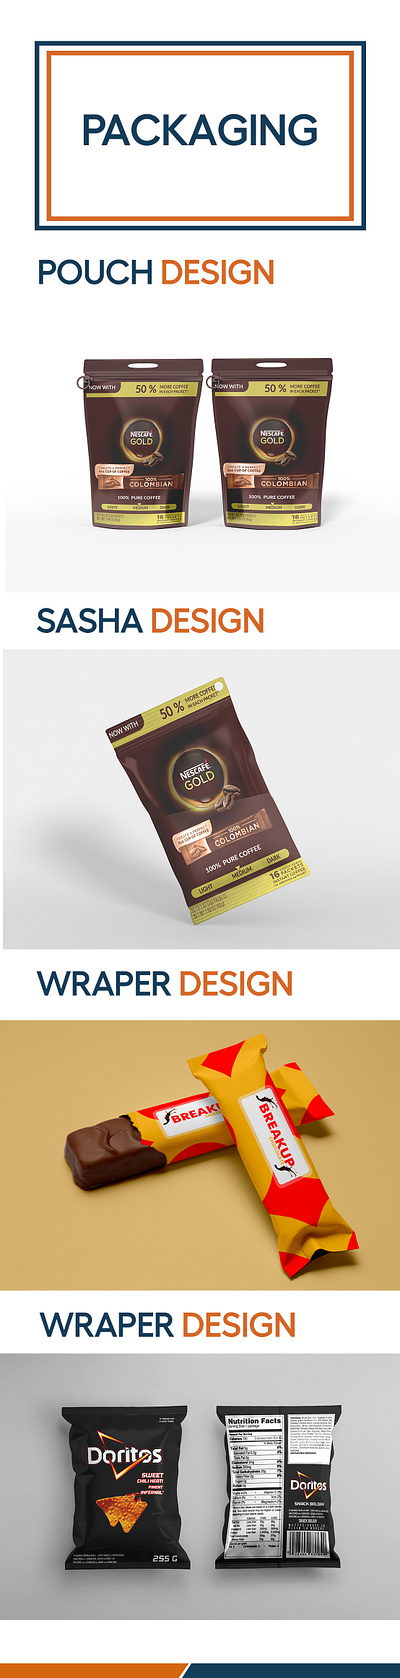 Packaging Design brand branding design graphic design packaging packaging design product design wrapping design